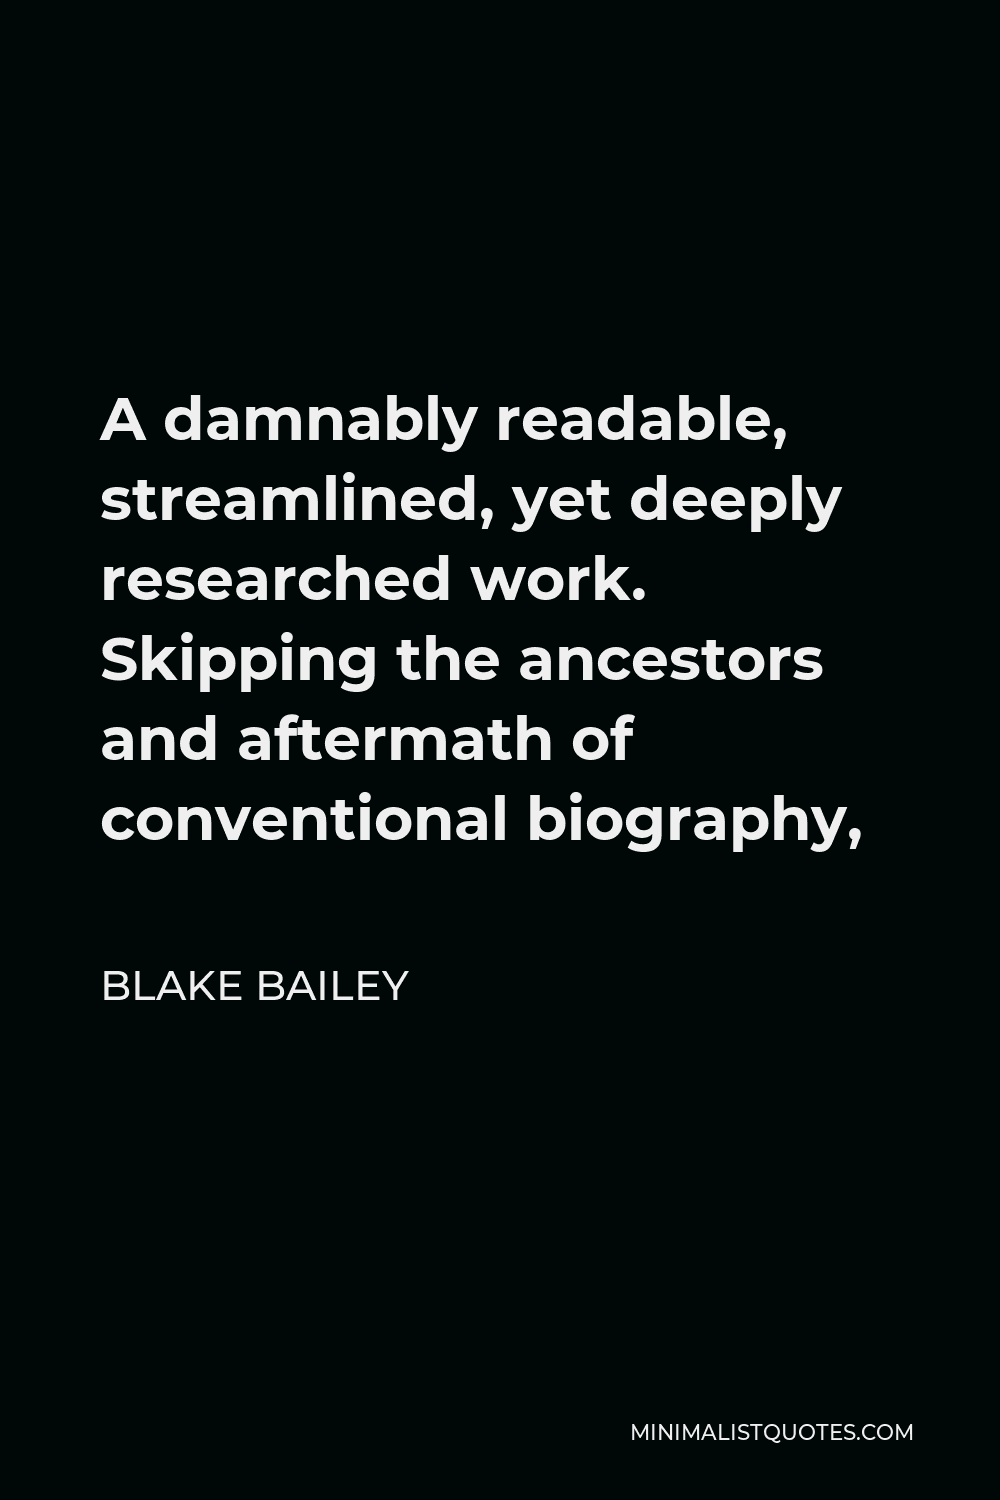 Blake Bailey Quote - A damnably readable, streamlined, yet deeply researched work. Skipping the ancestors and aftermath of conventional biography,